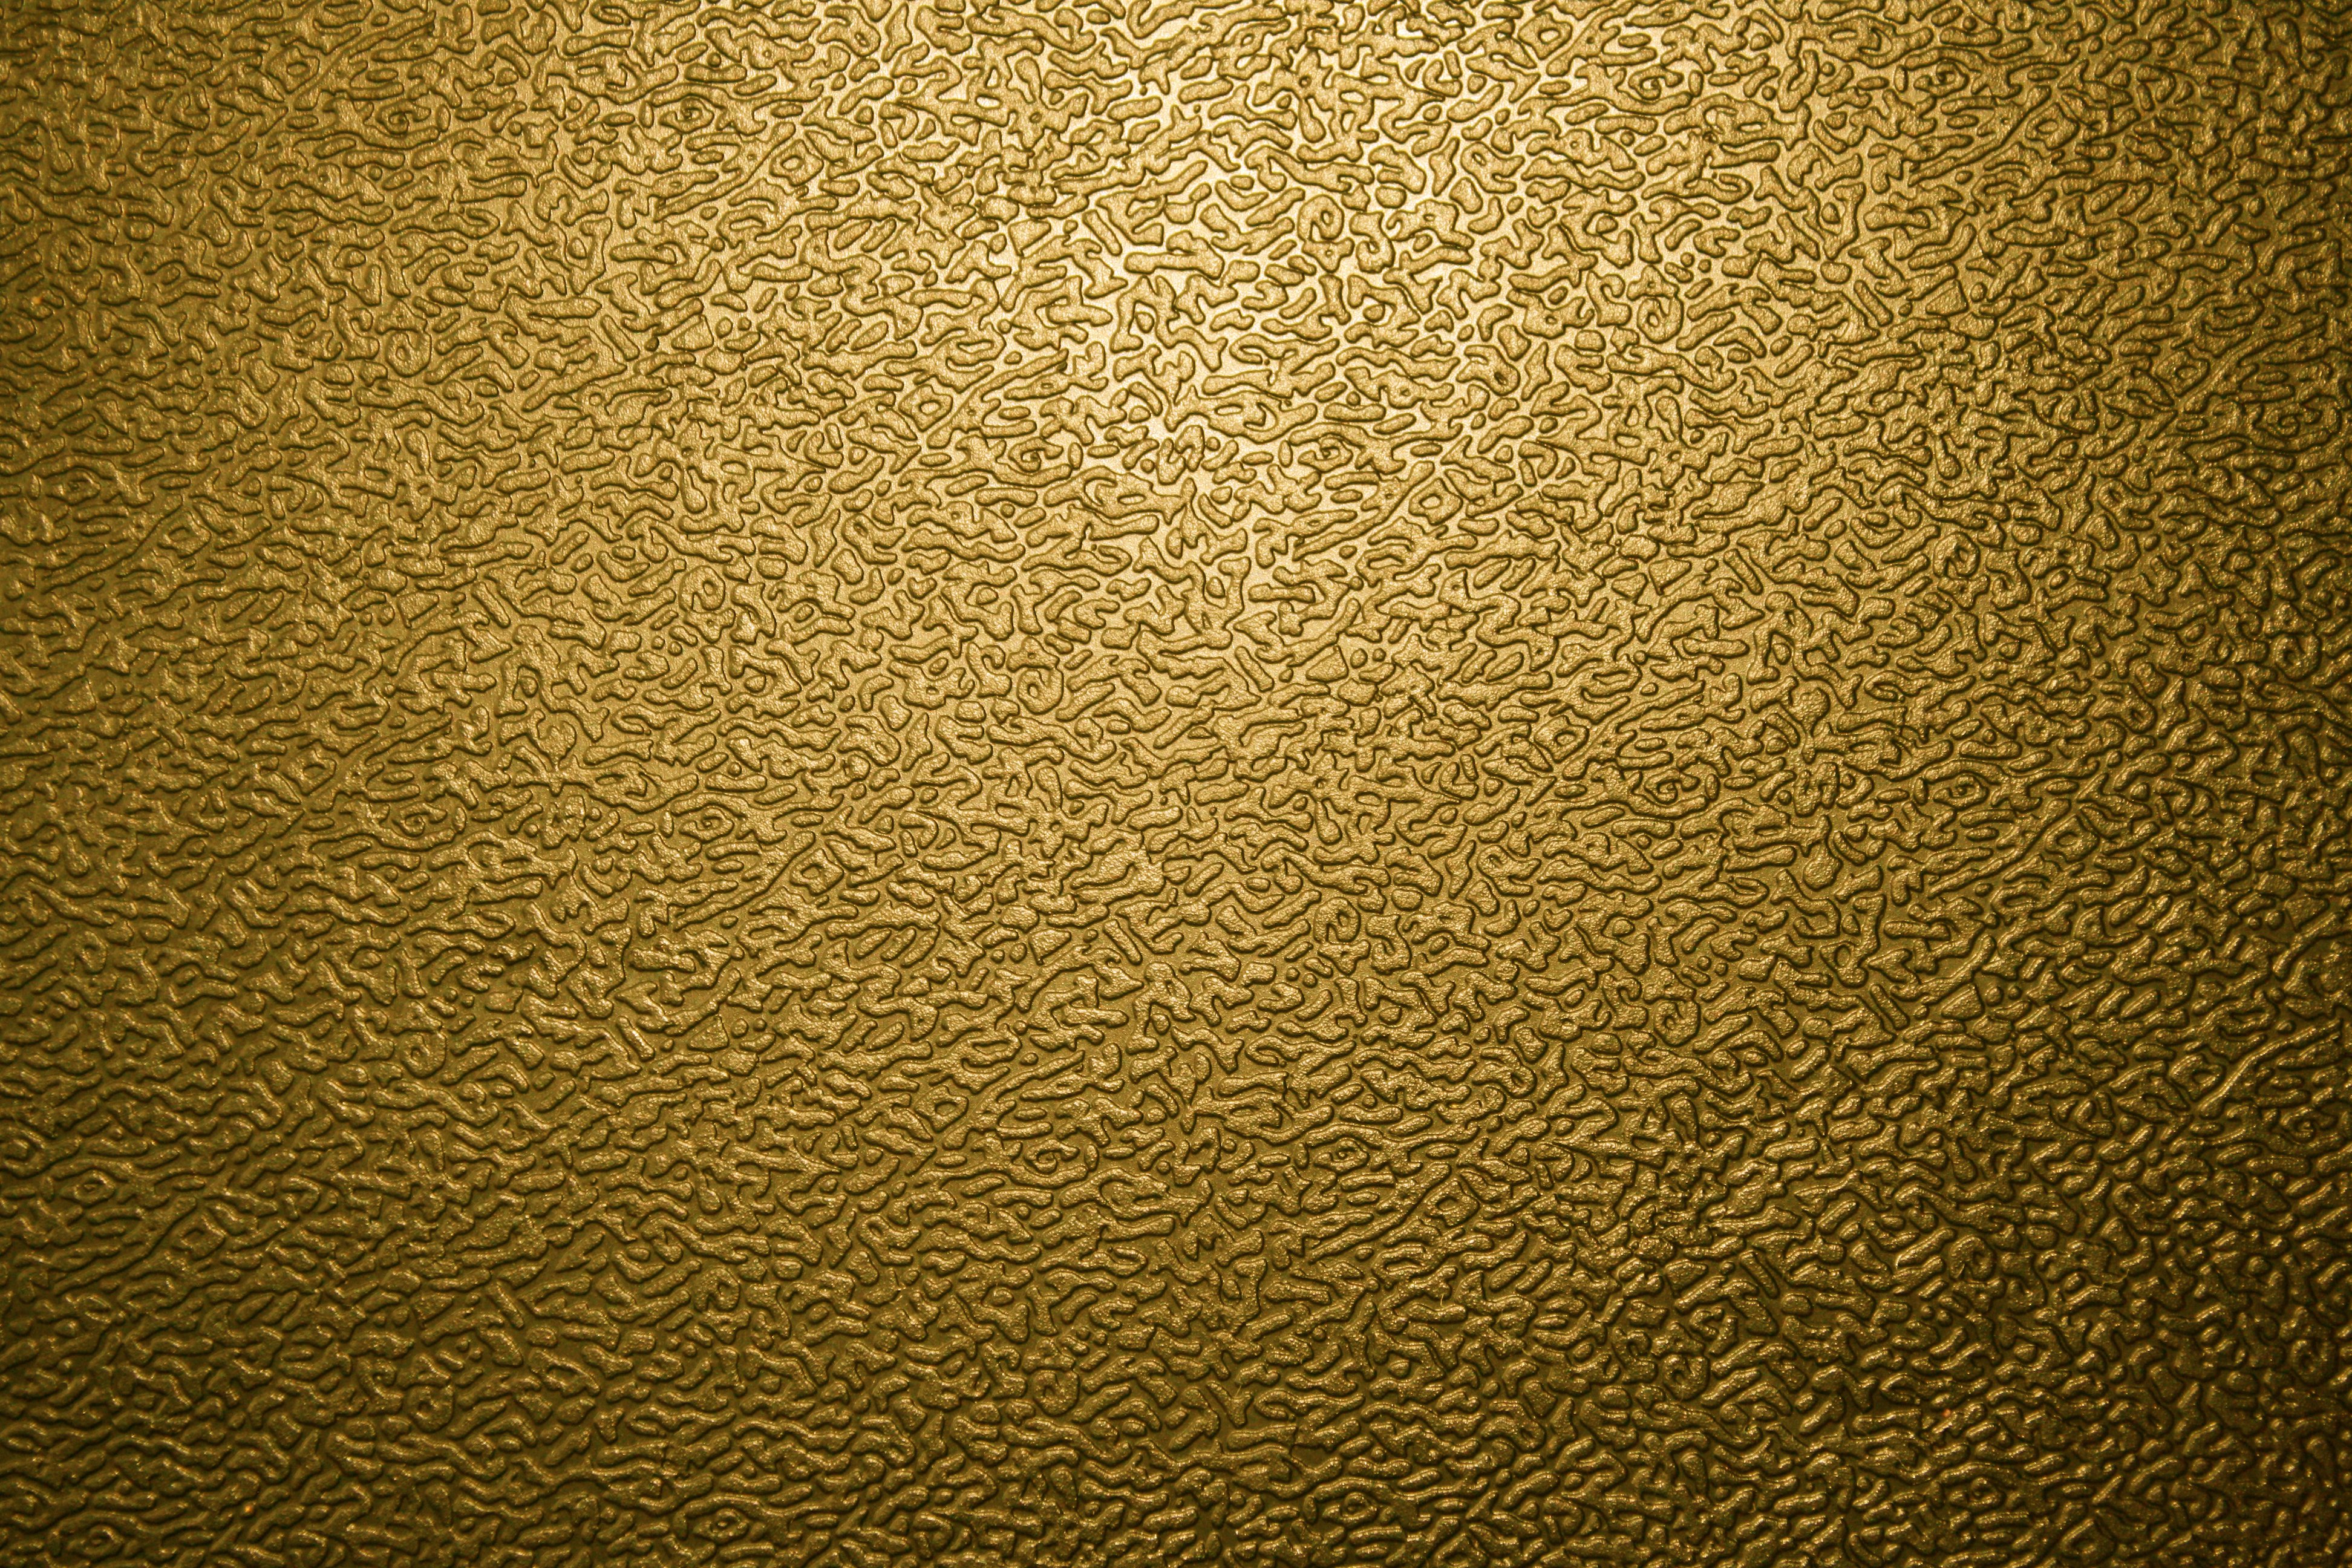 Textured Gold Plastic Close Up Picture Free Photograph Photos